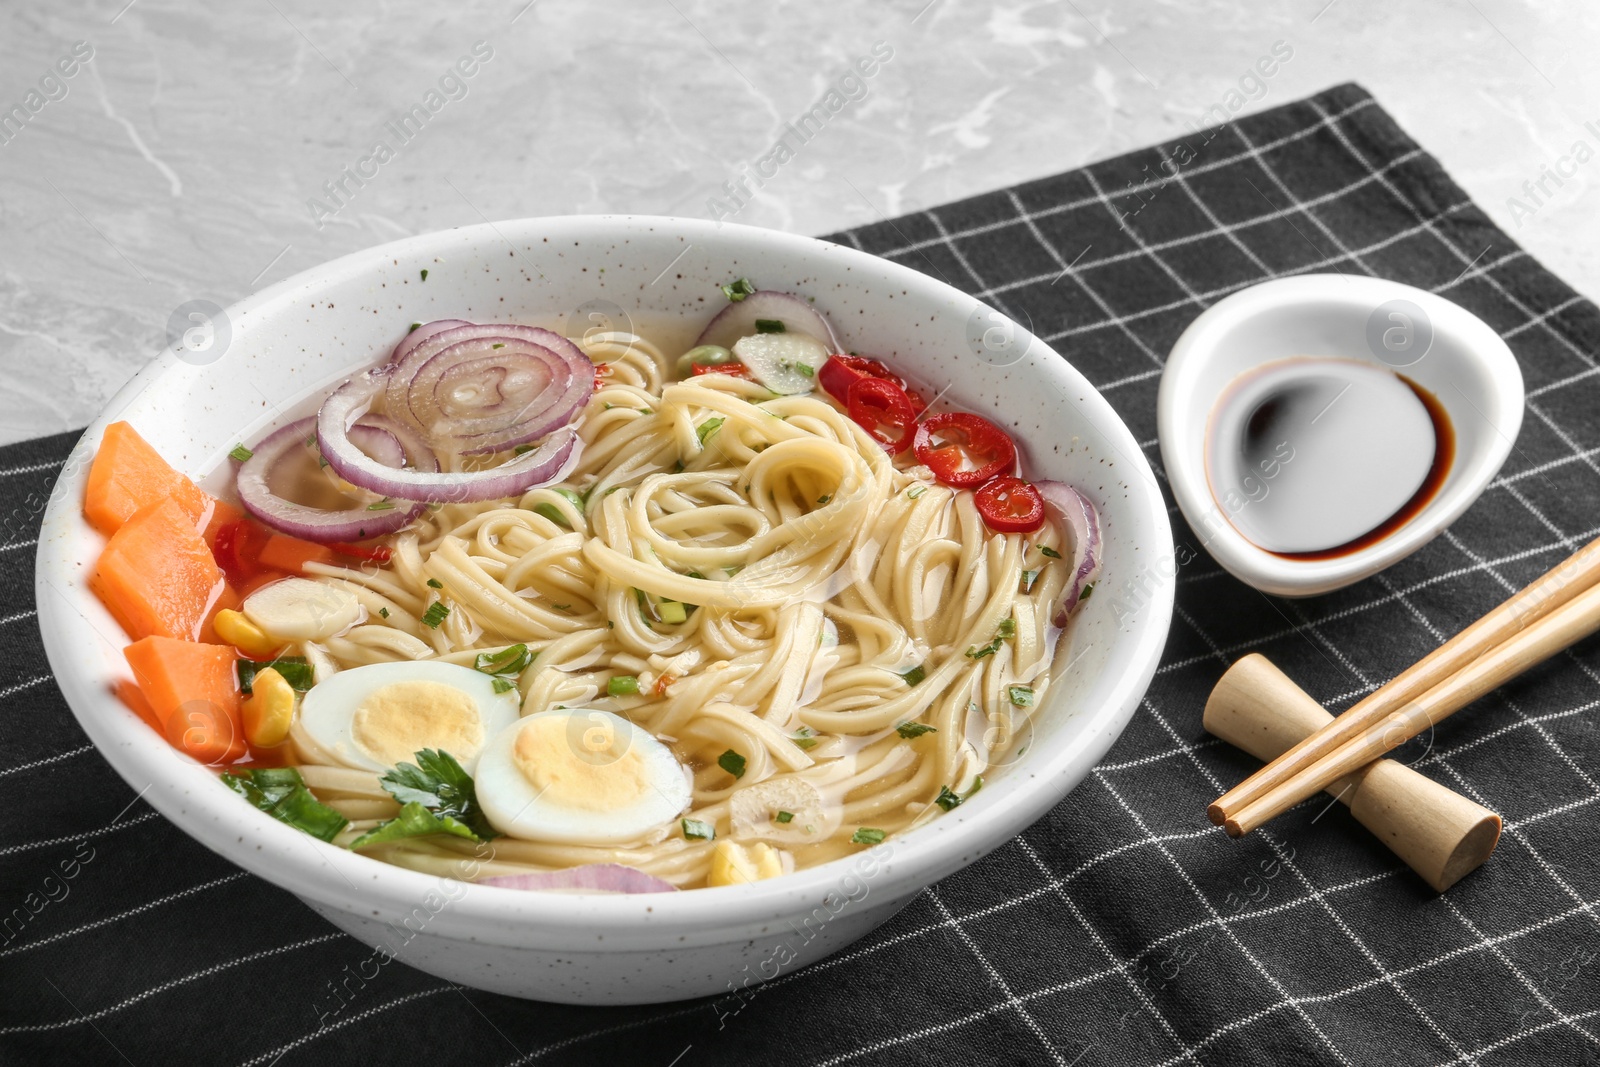 Photo of Bowl of noodles with broth, egg, vegetables and chopsticks served on table